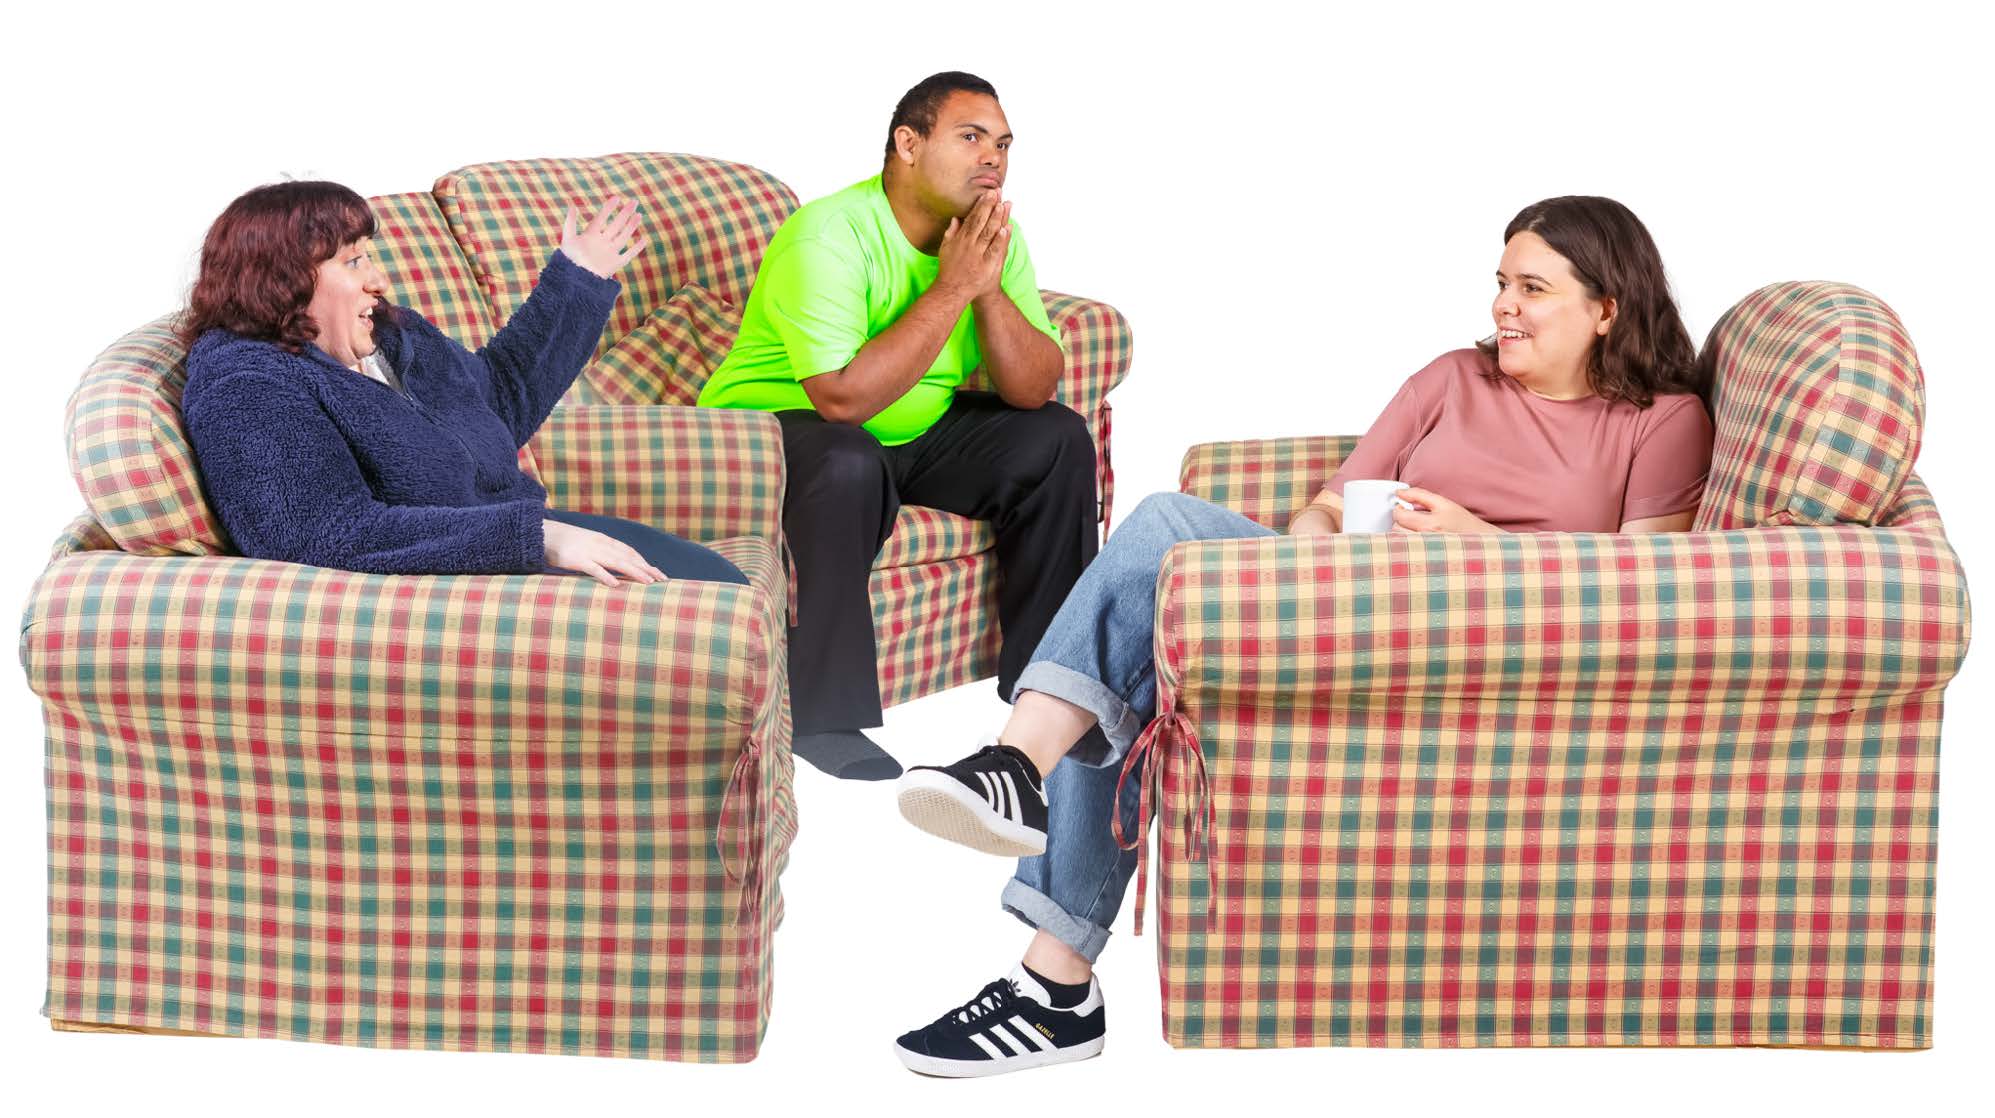 3 people sitting on couches talking